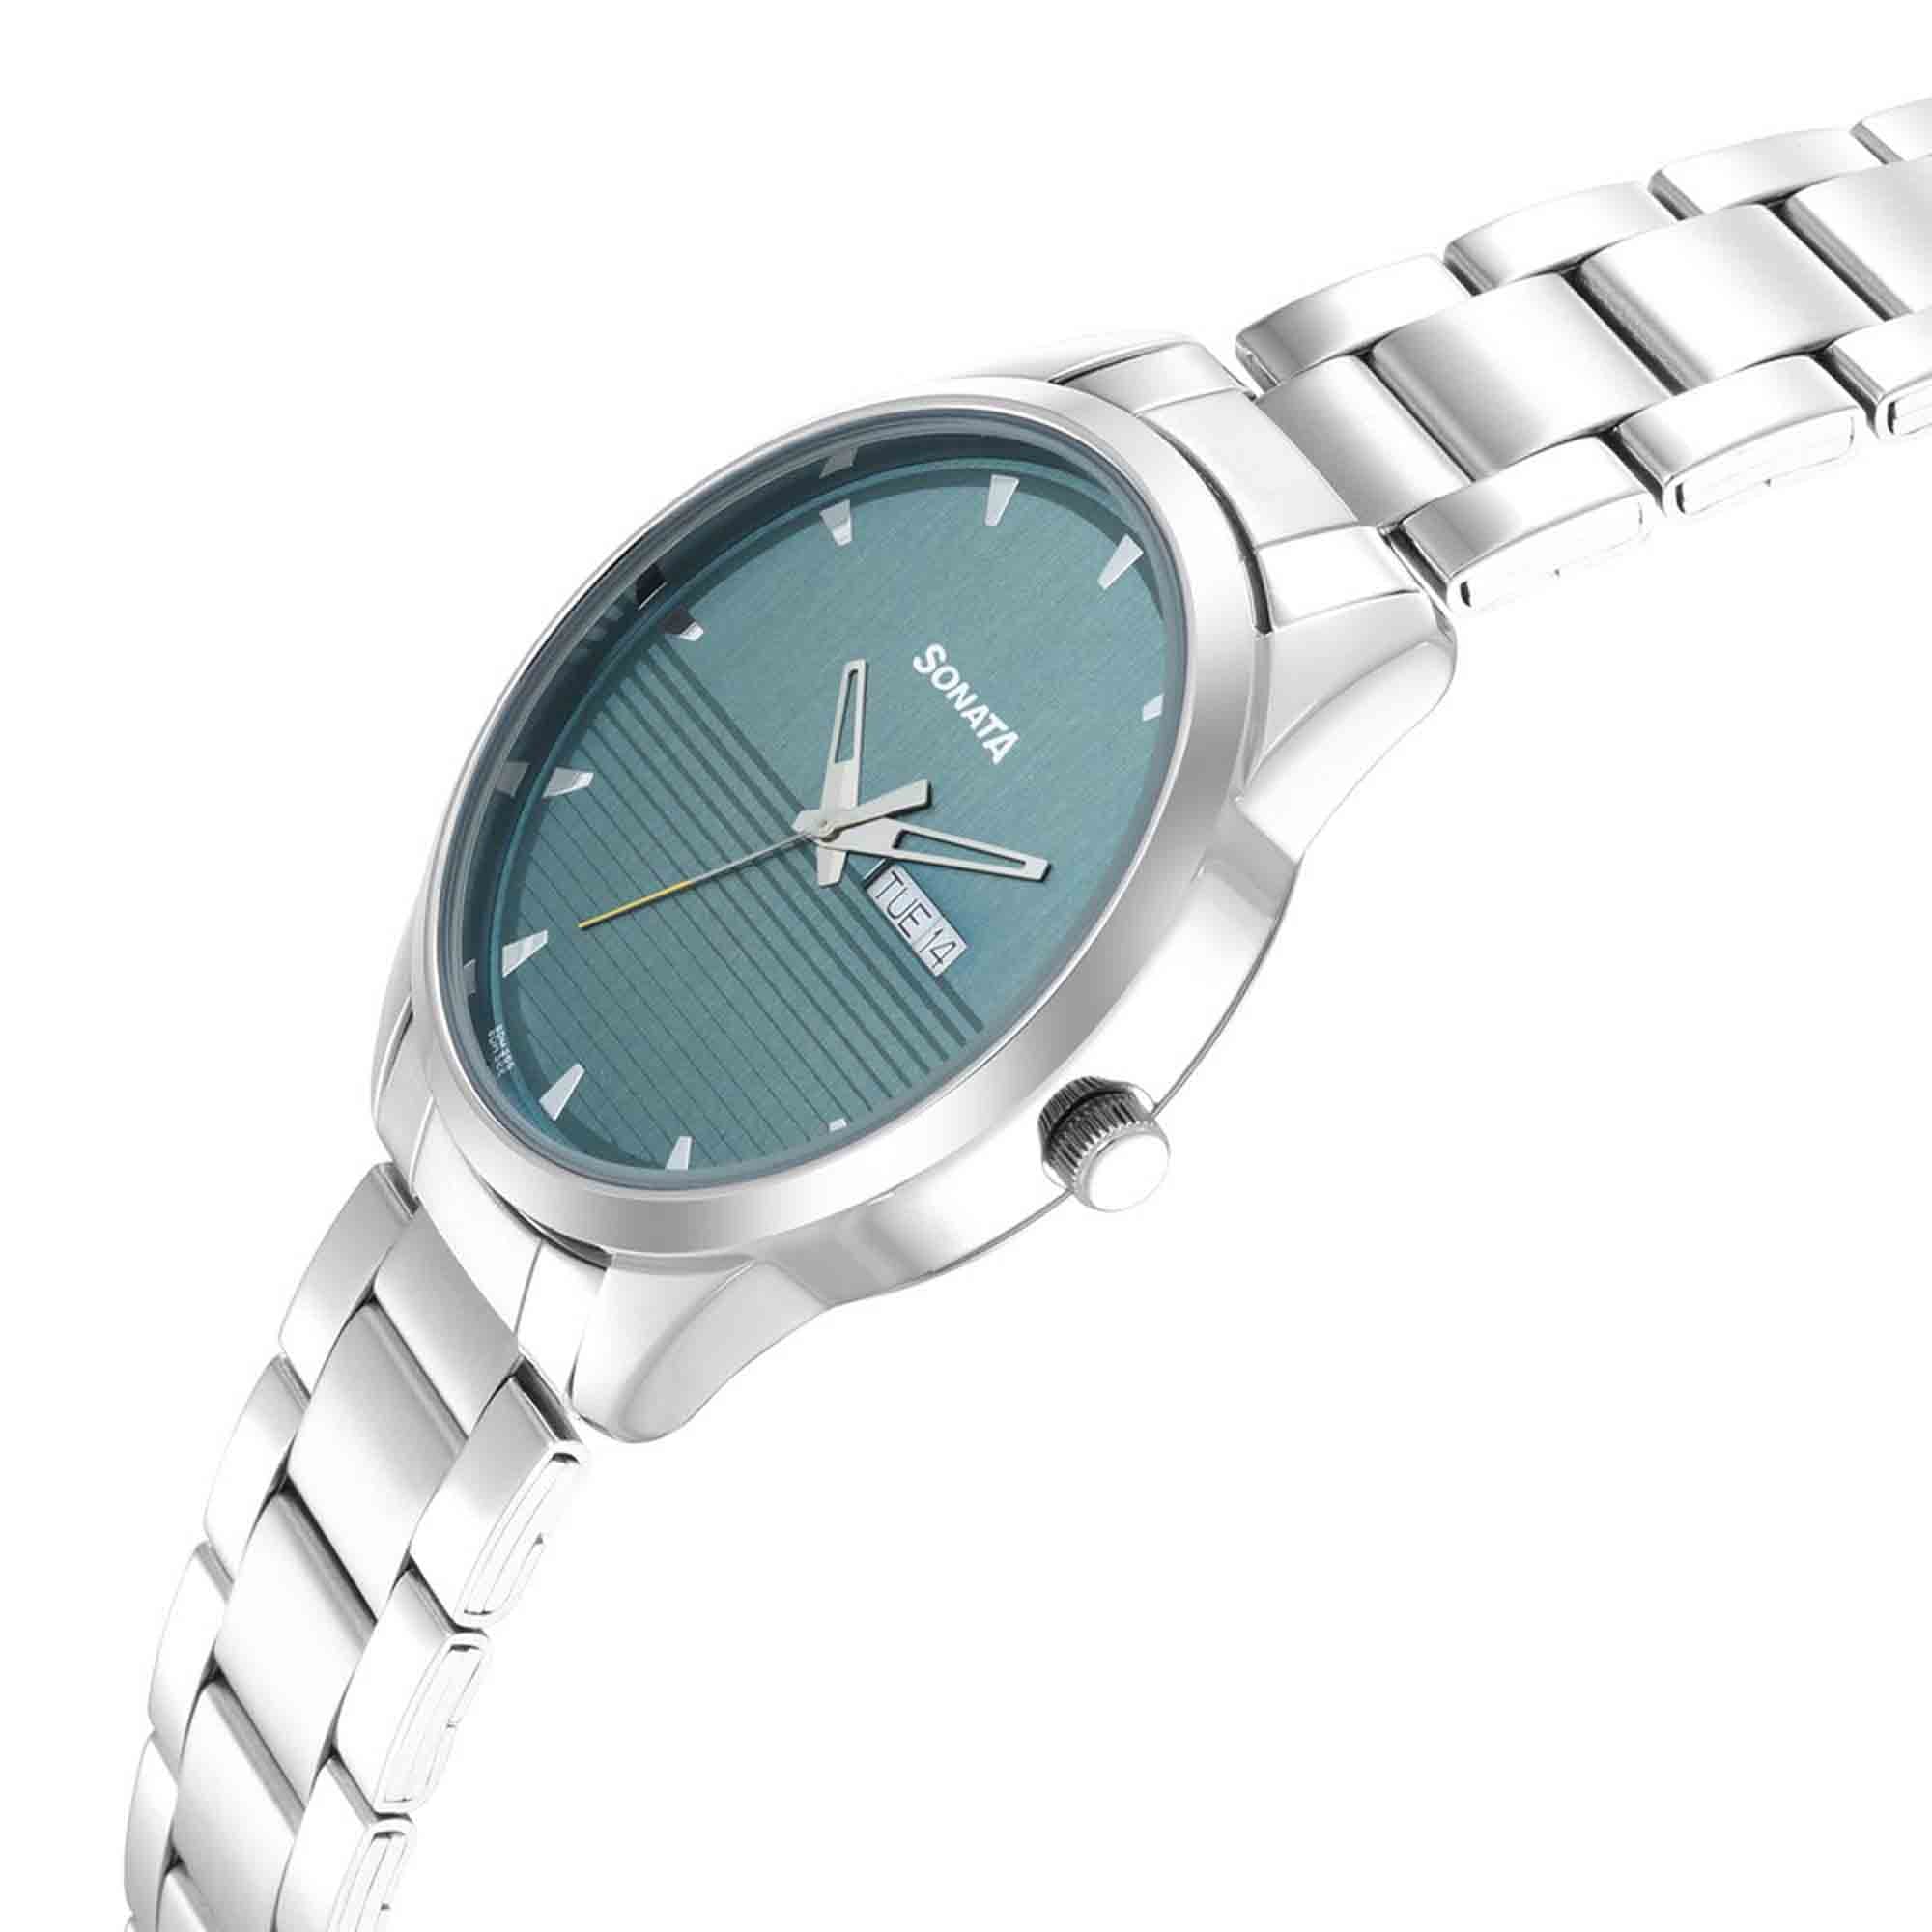 Sonata Quartz Analog with Day and Date Blue Dial Stainless Steel Strap Watch for Men